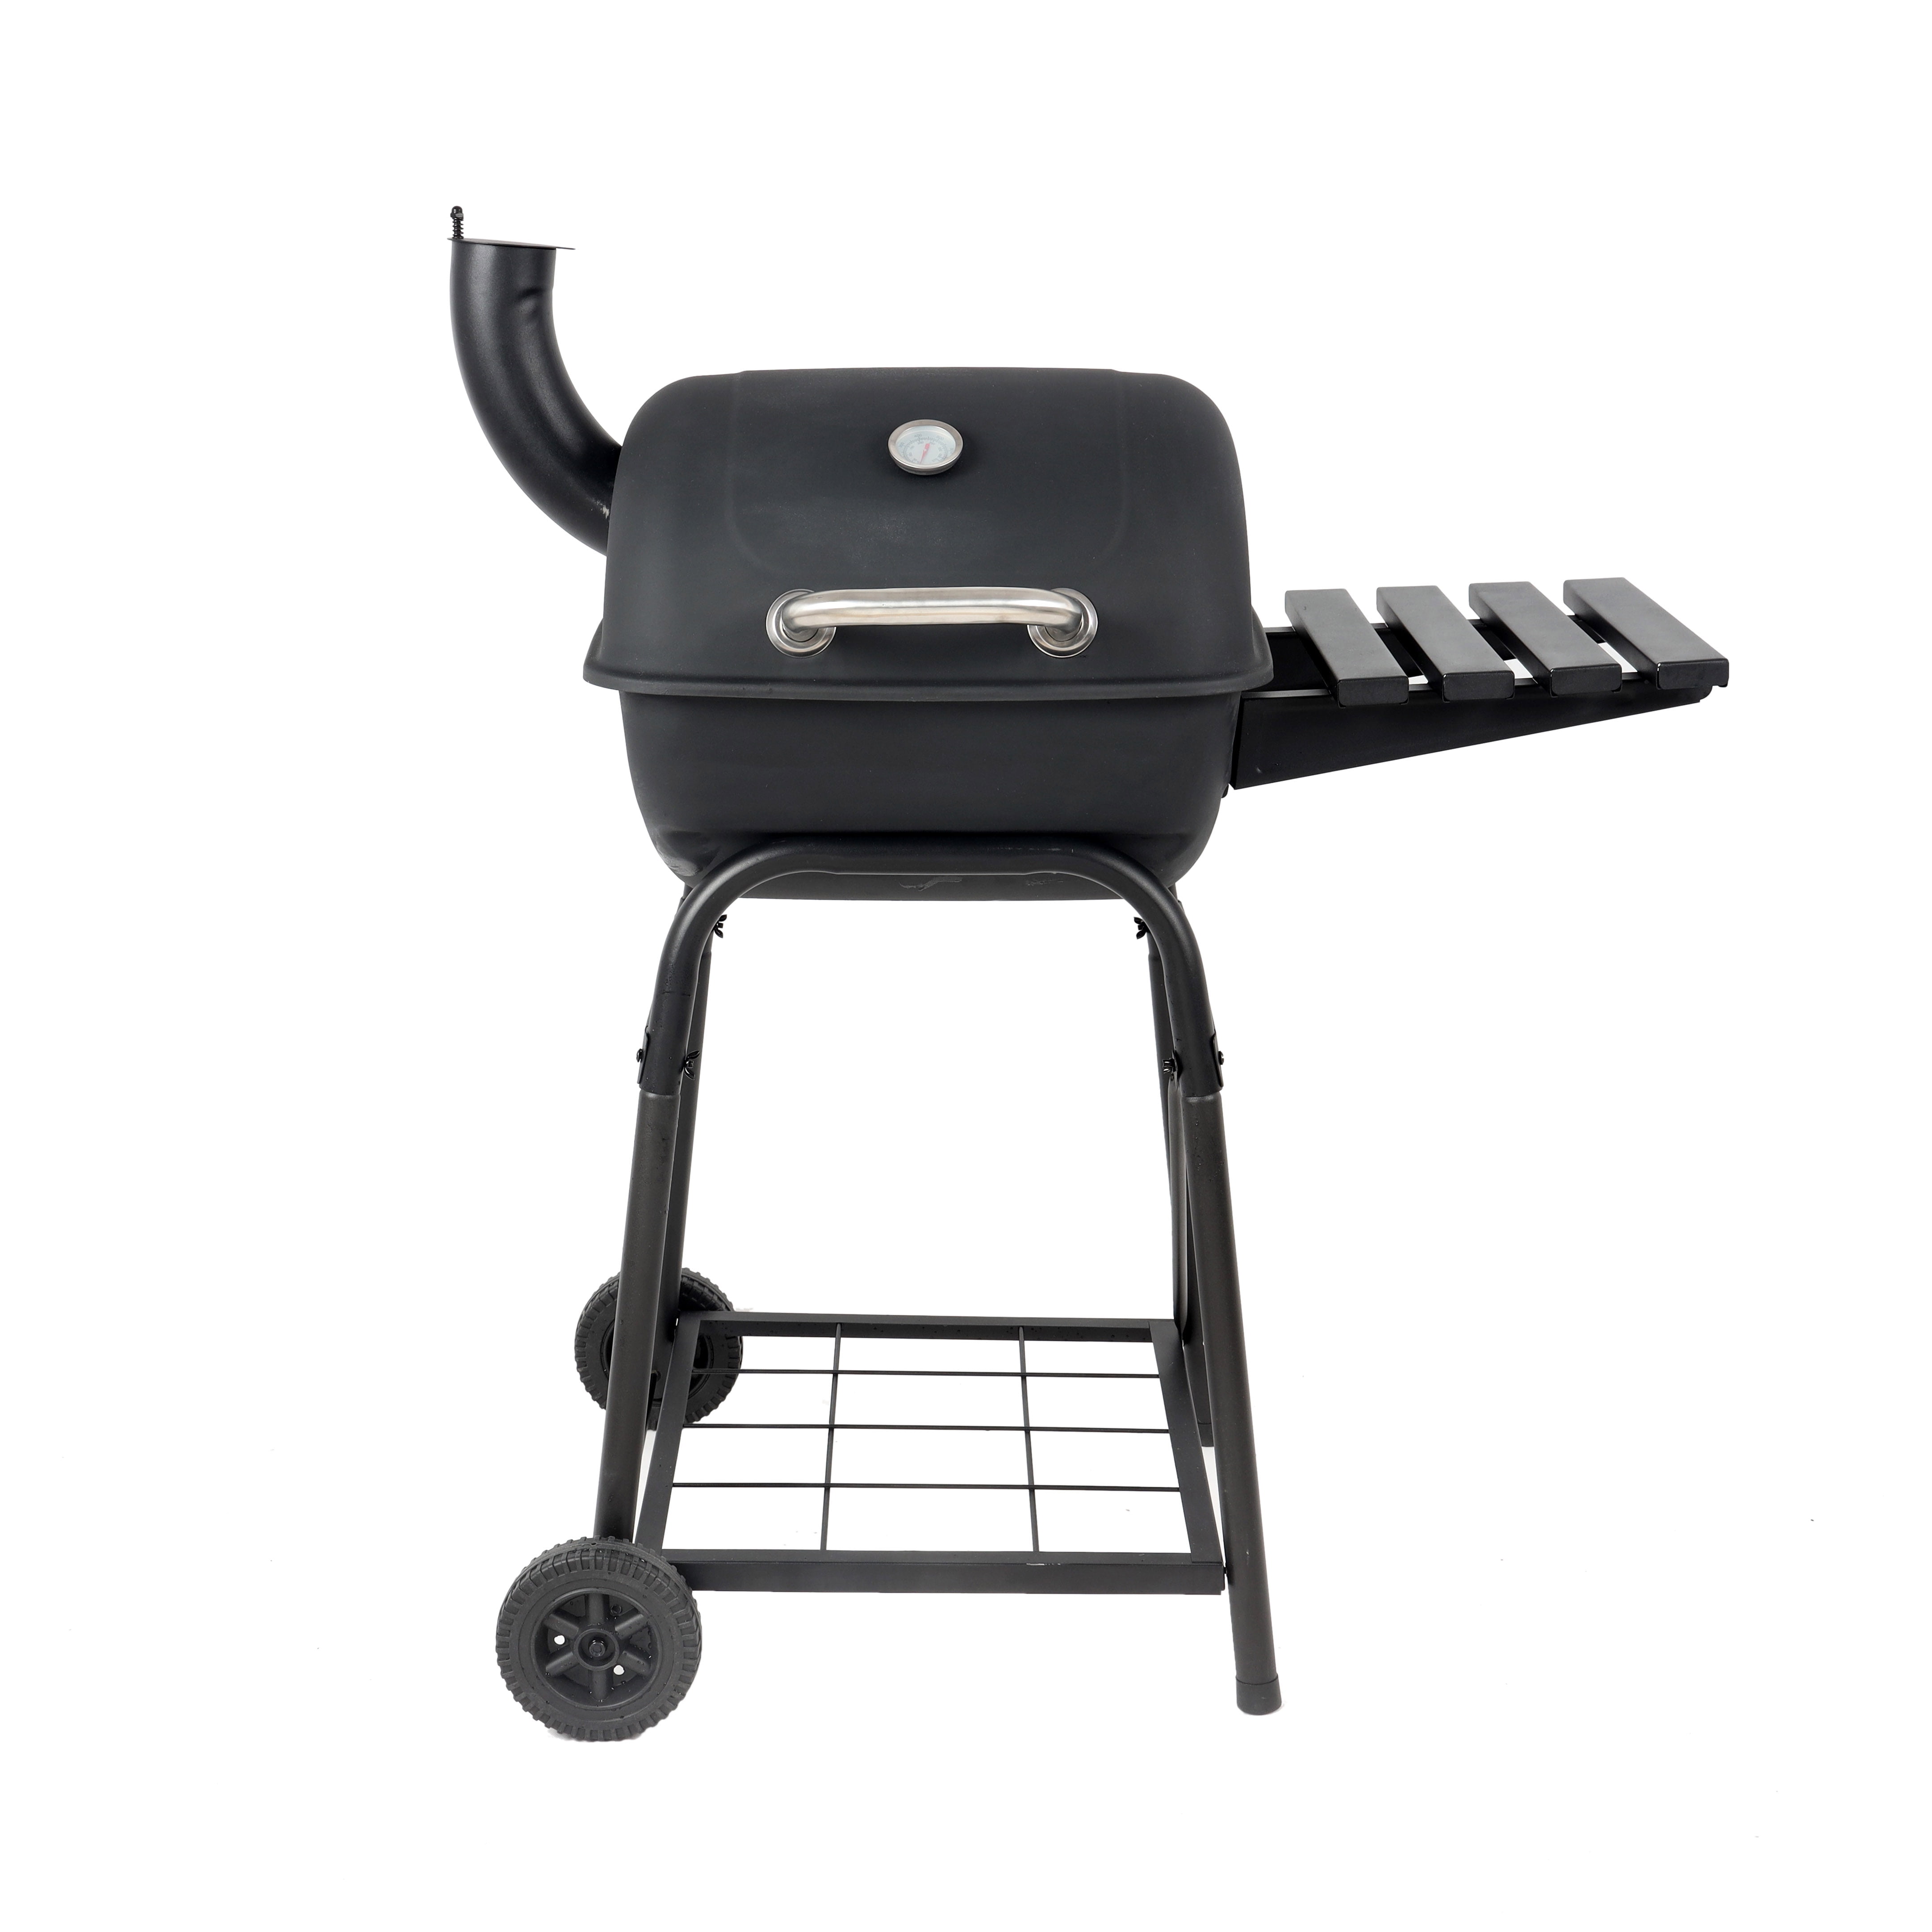 Bbq-toro: 13,442 Reviews of 113 Products 